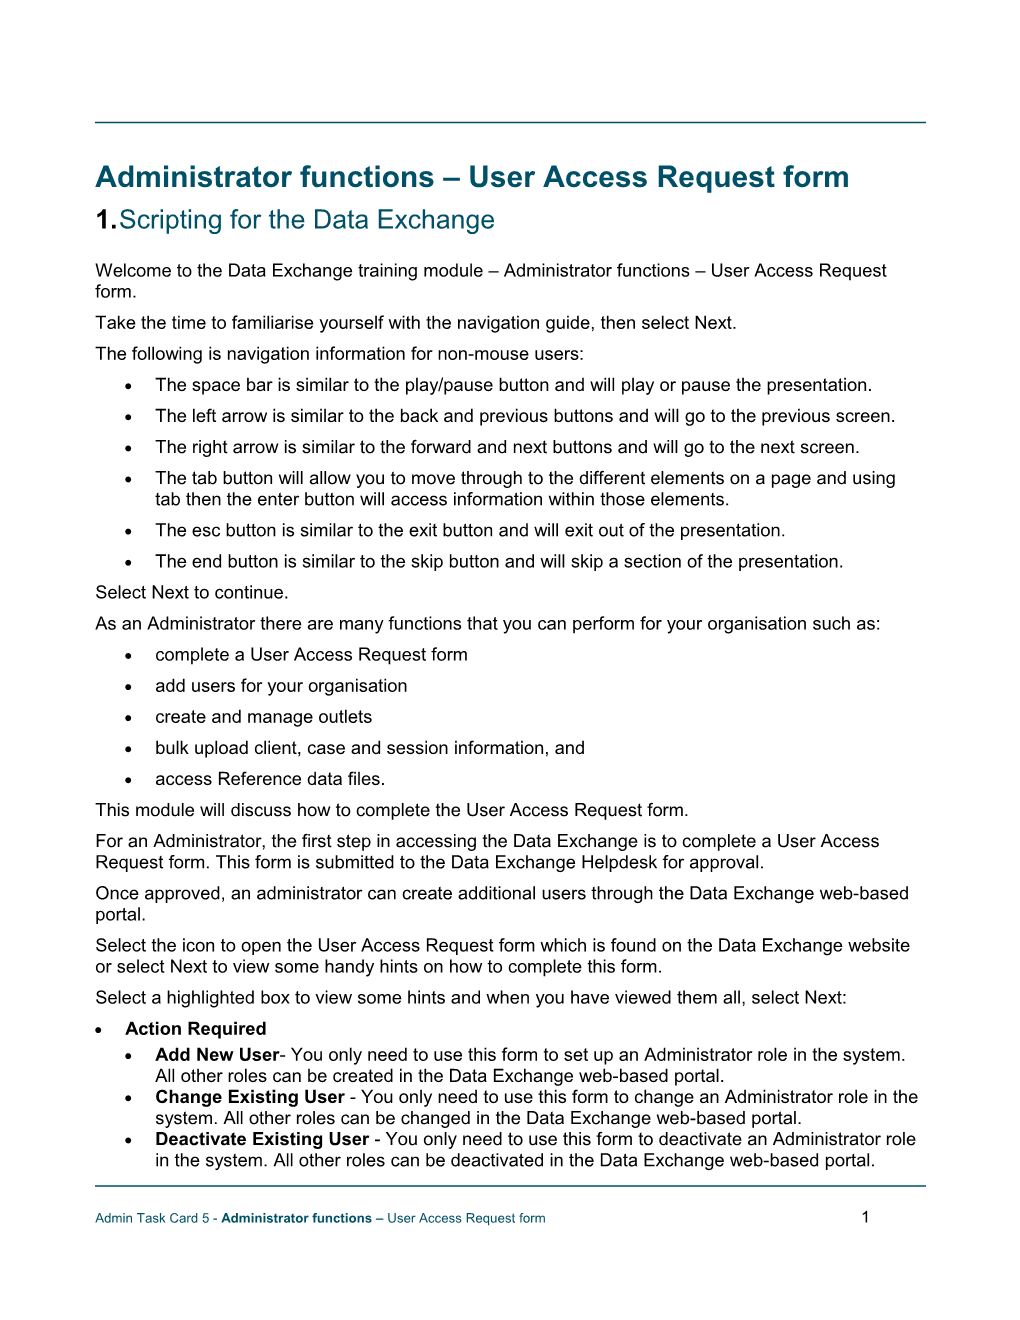 Administrator Functions User Access Request Form